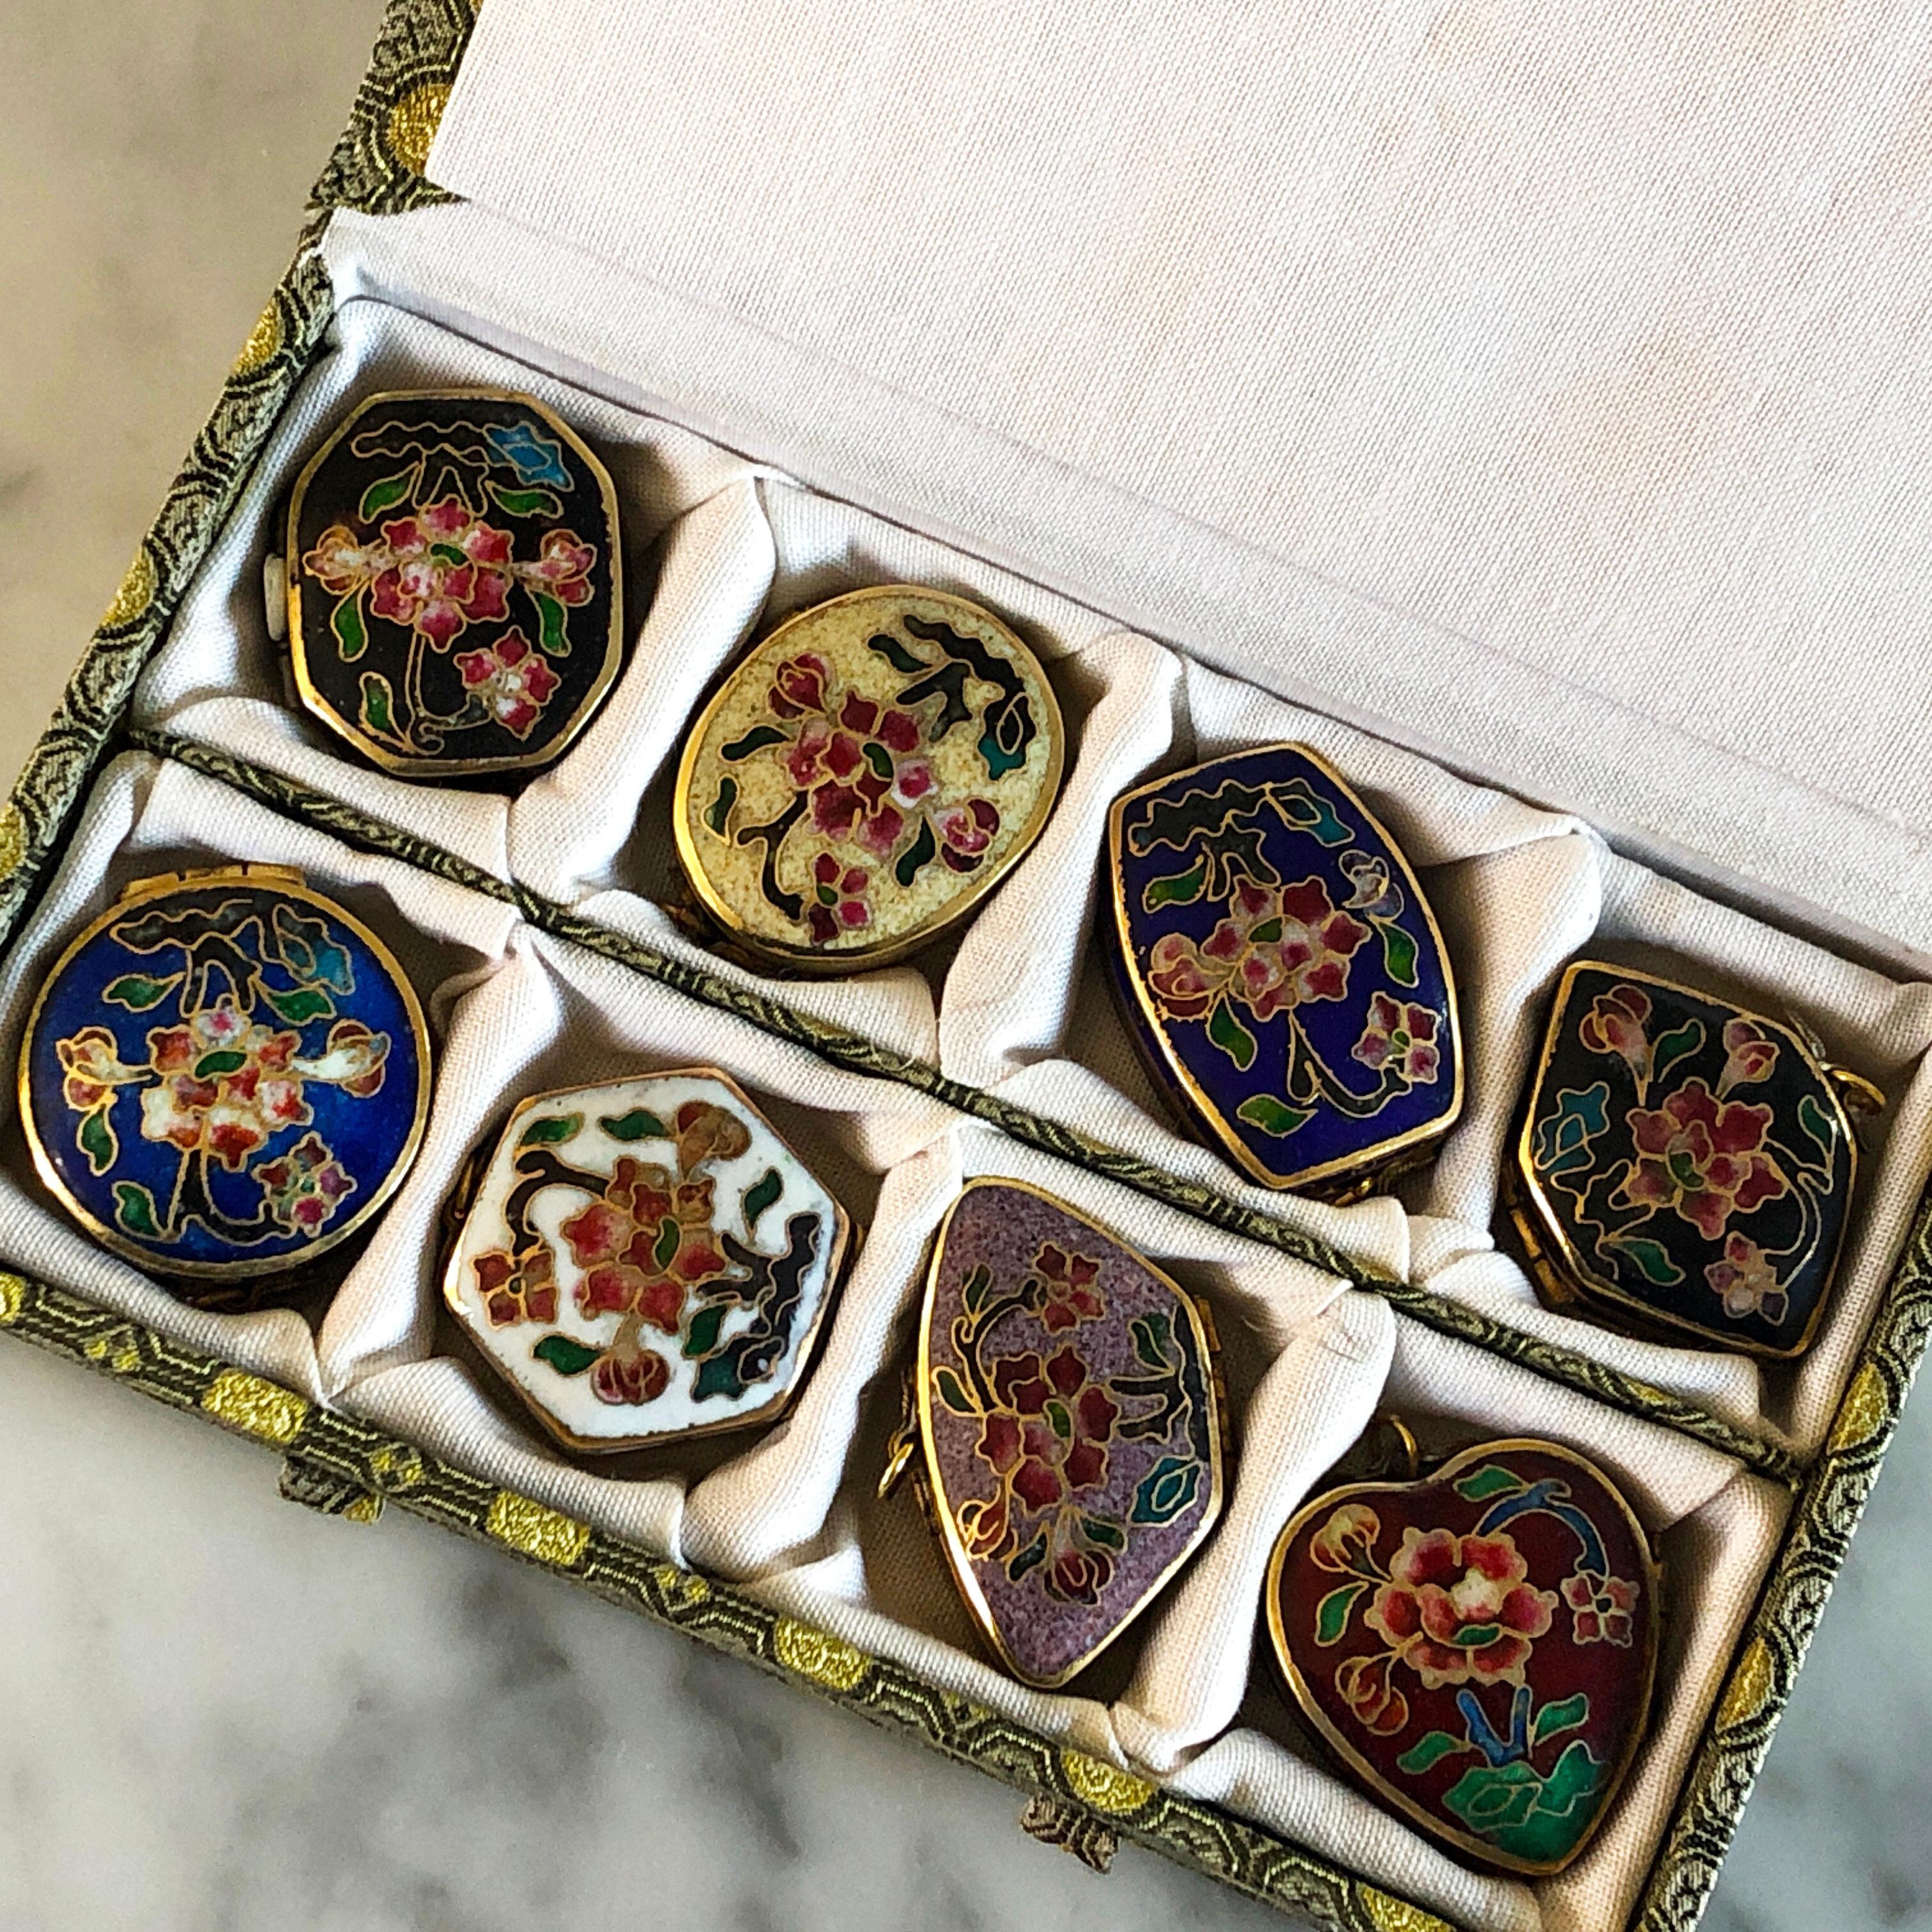 One-of-a-kind, Original 1930, Chinese Export Cloisonné Pill Boxes Collection.
These Unique Pieces are still in excellent, perfect conditions: every box is one-of-a-kind and can be used as a pendant as well: they are beautifully hand enameled and set